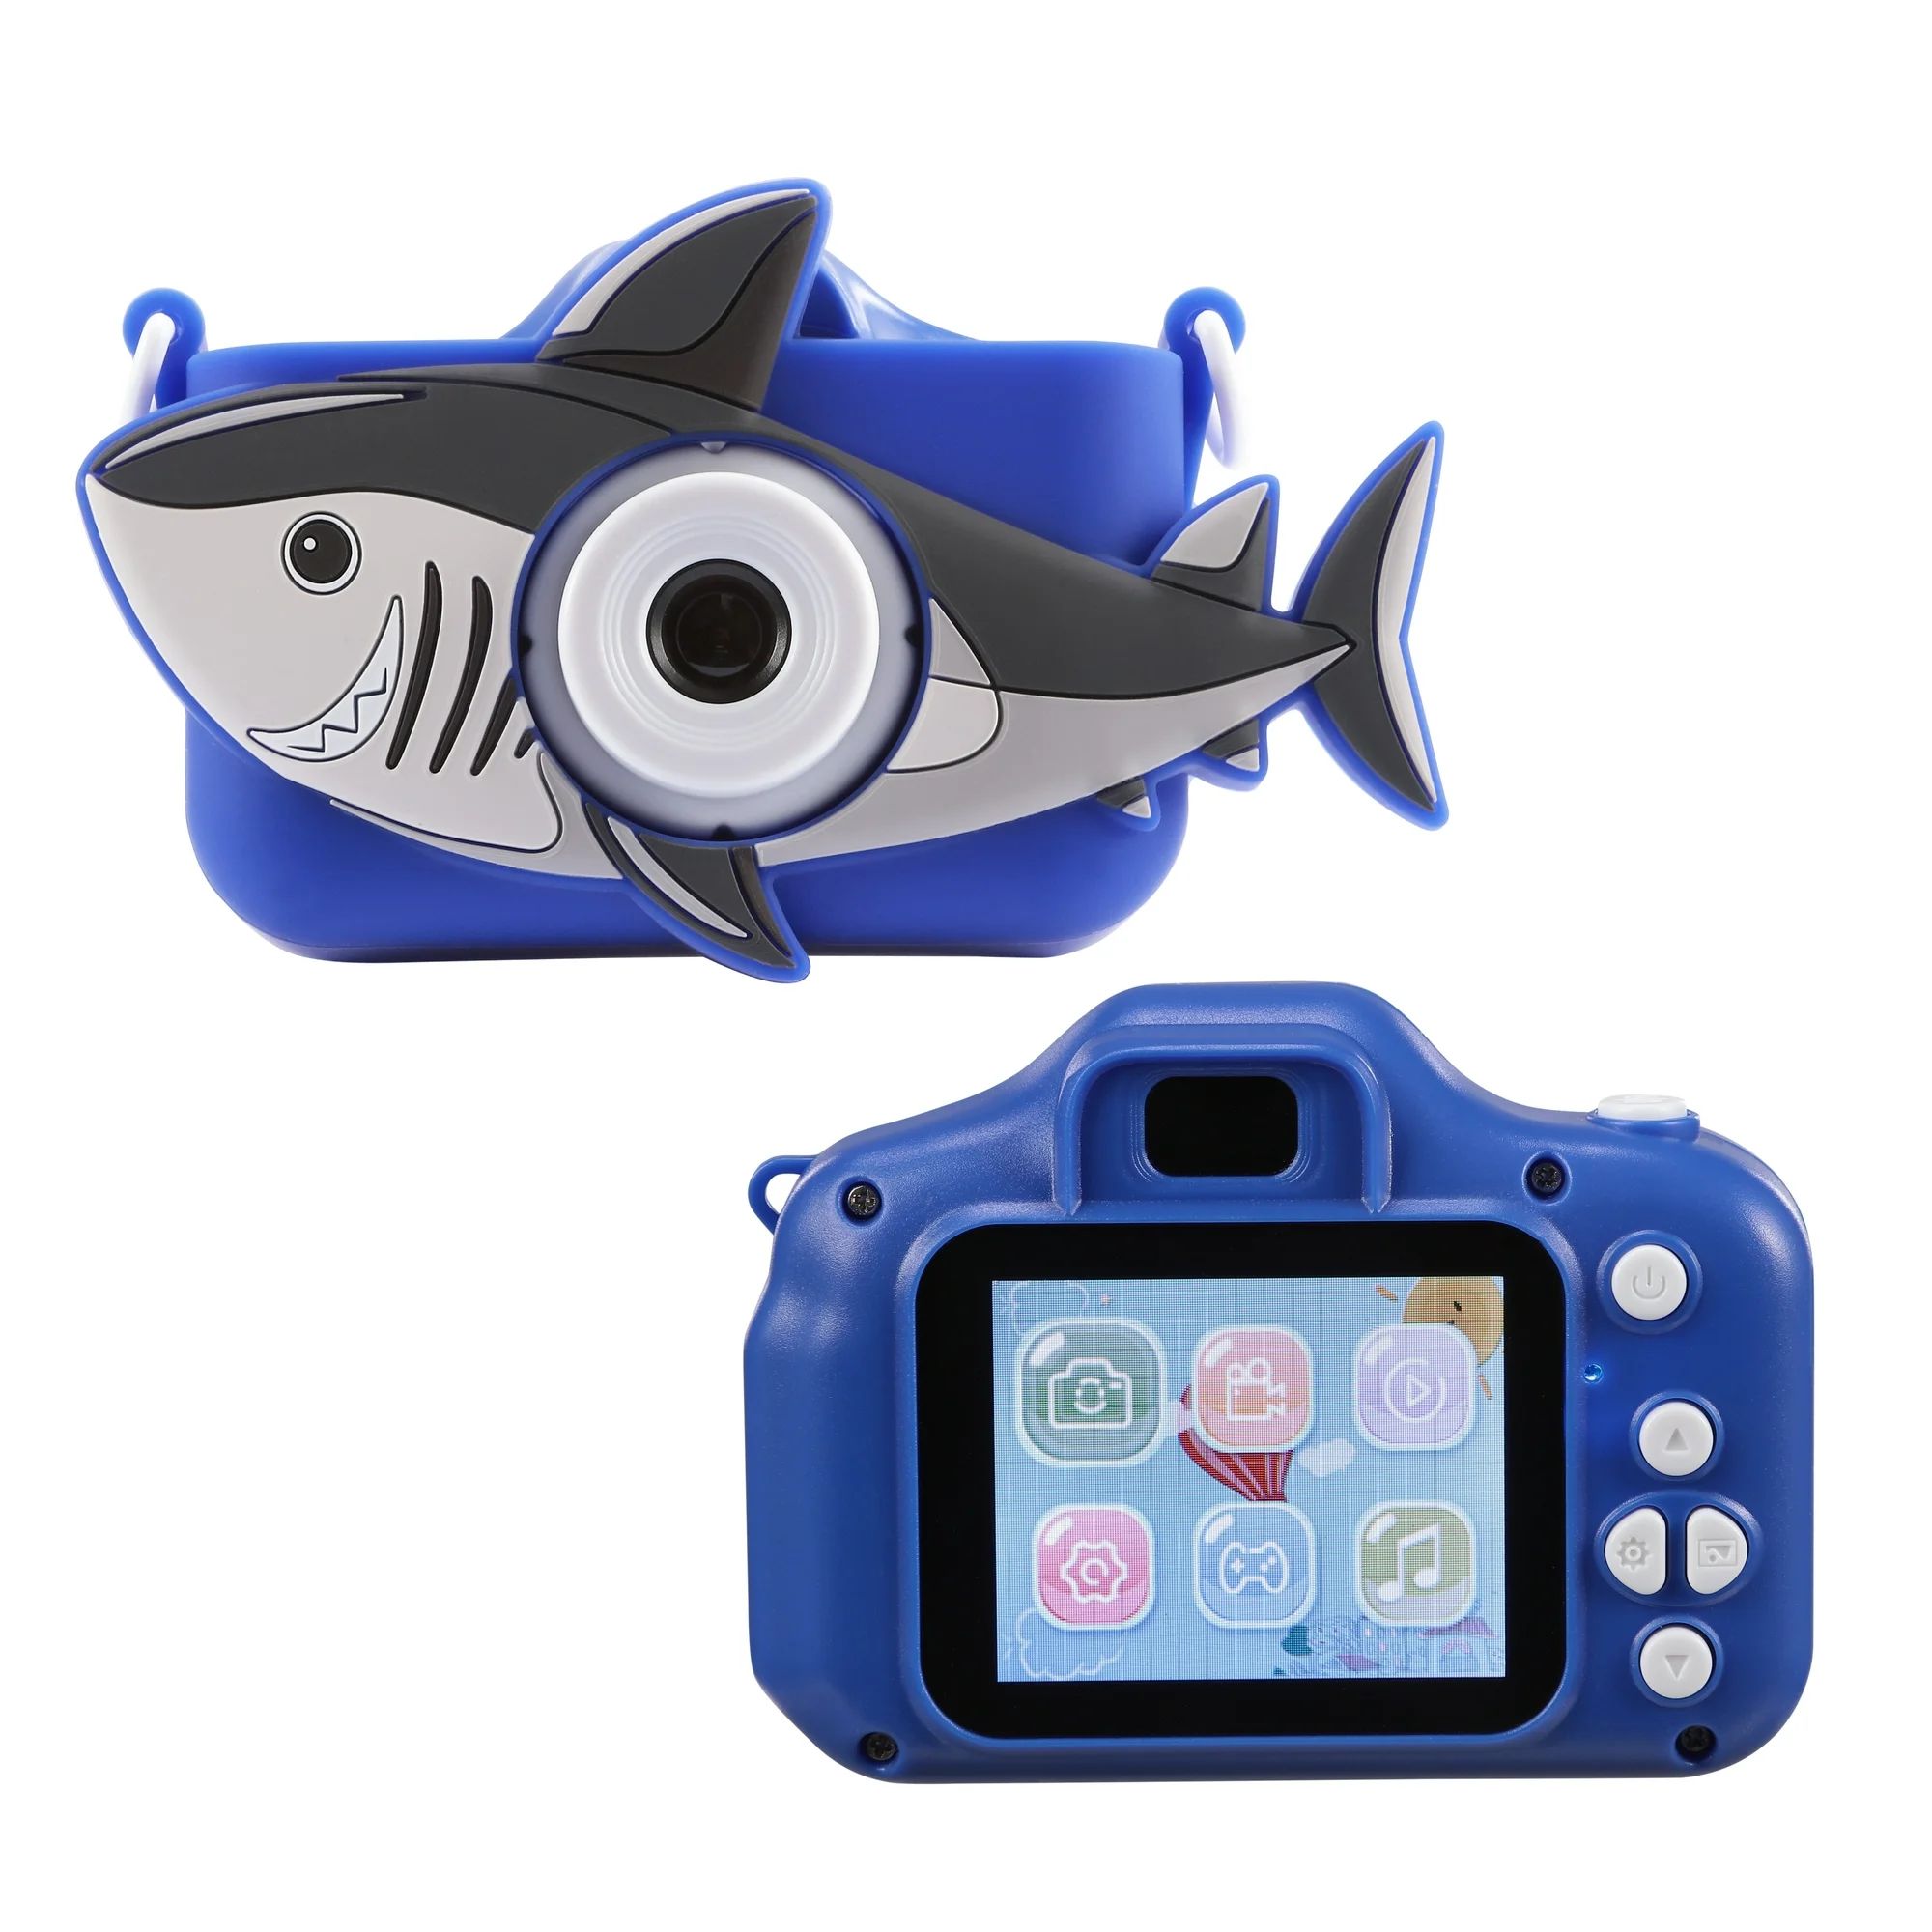 Vivitar Kidzcam Camera for Kids with Video Games and Shark Jacket, Blue (New) | Walmart (US)